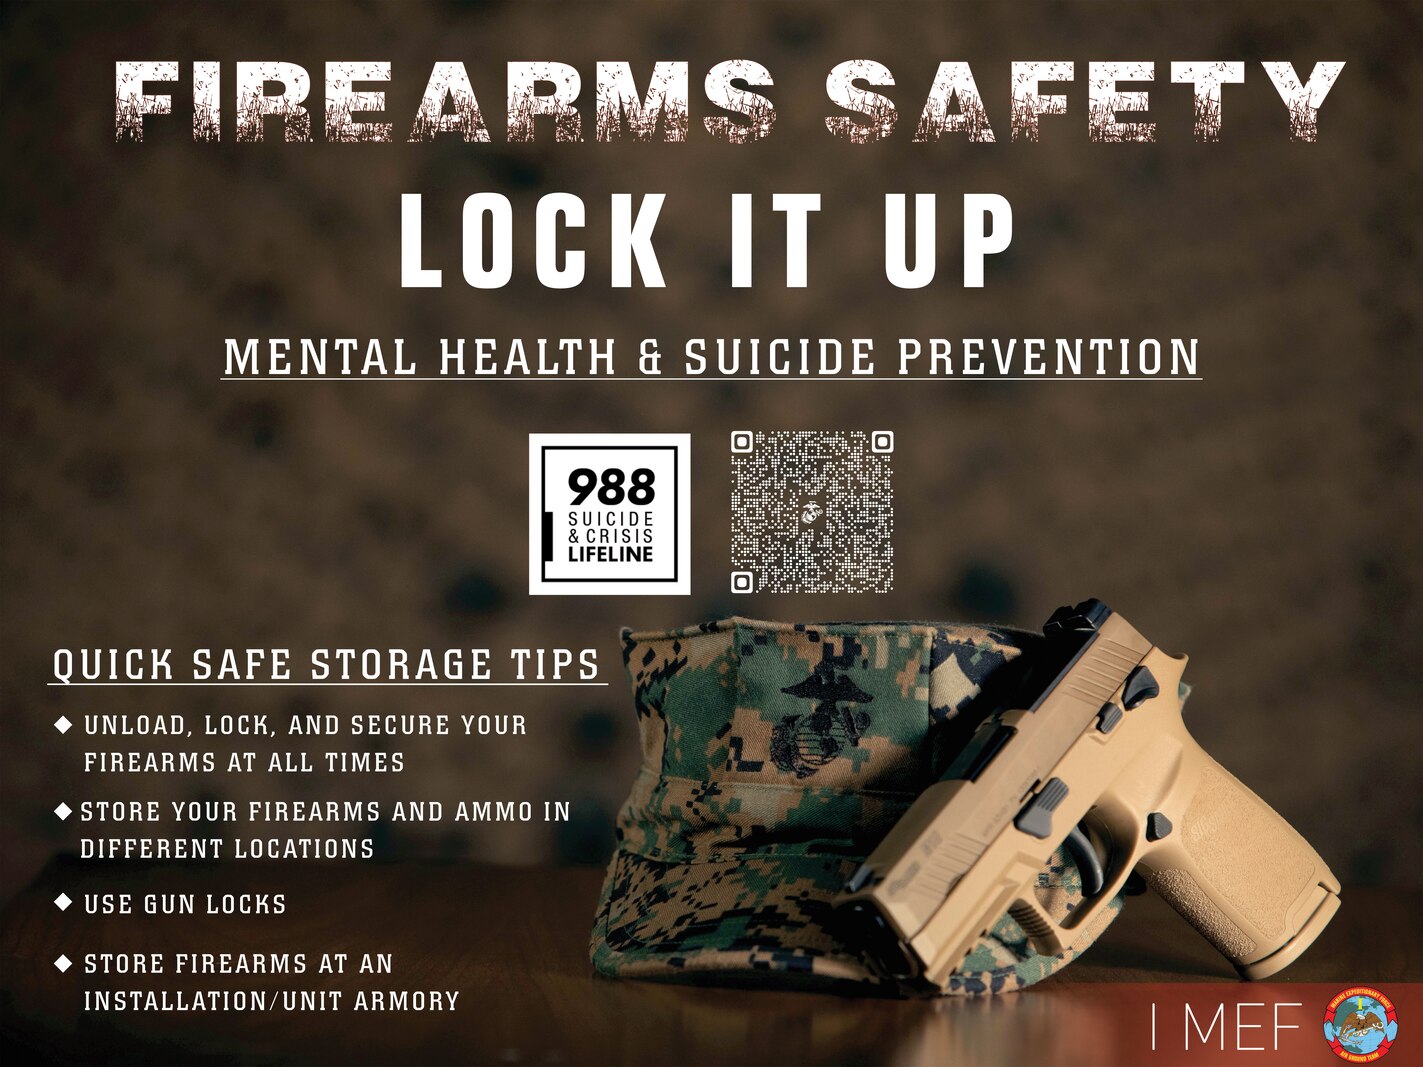 Suicide Prevention and Weapon Safety Campaign